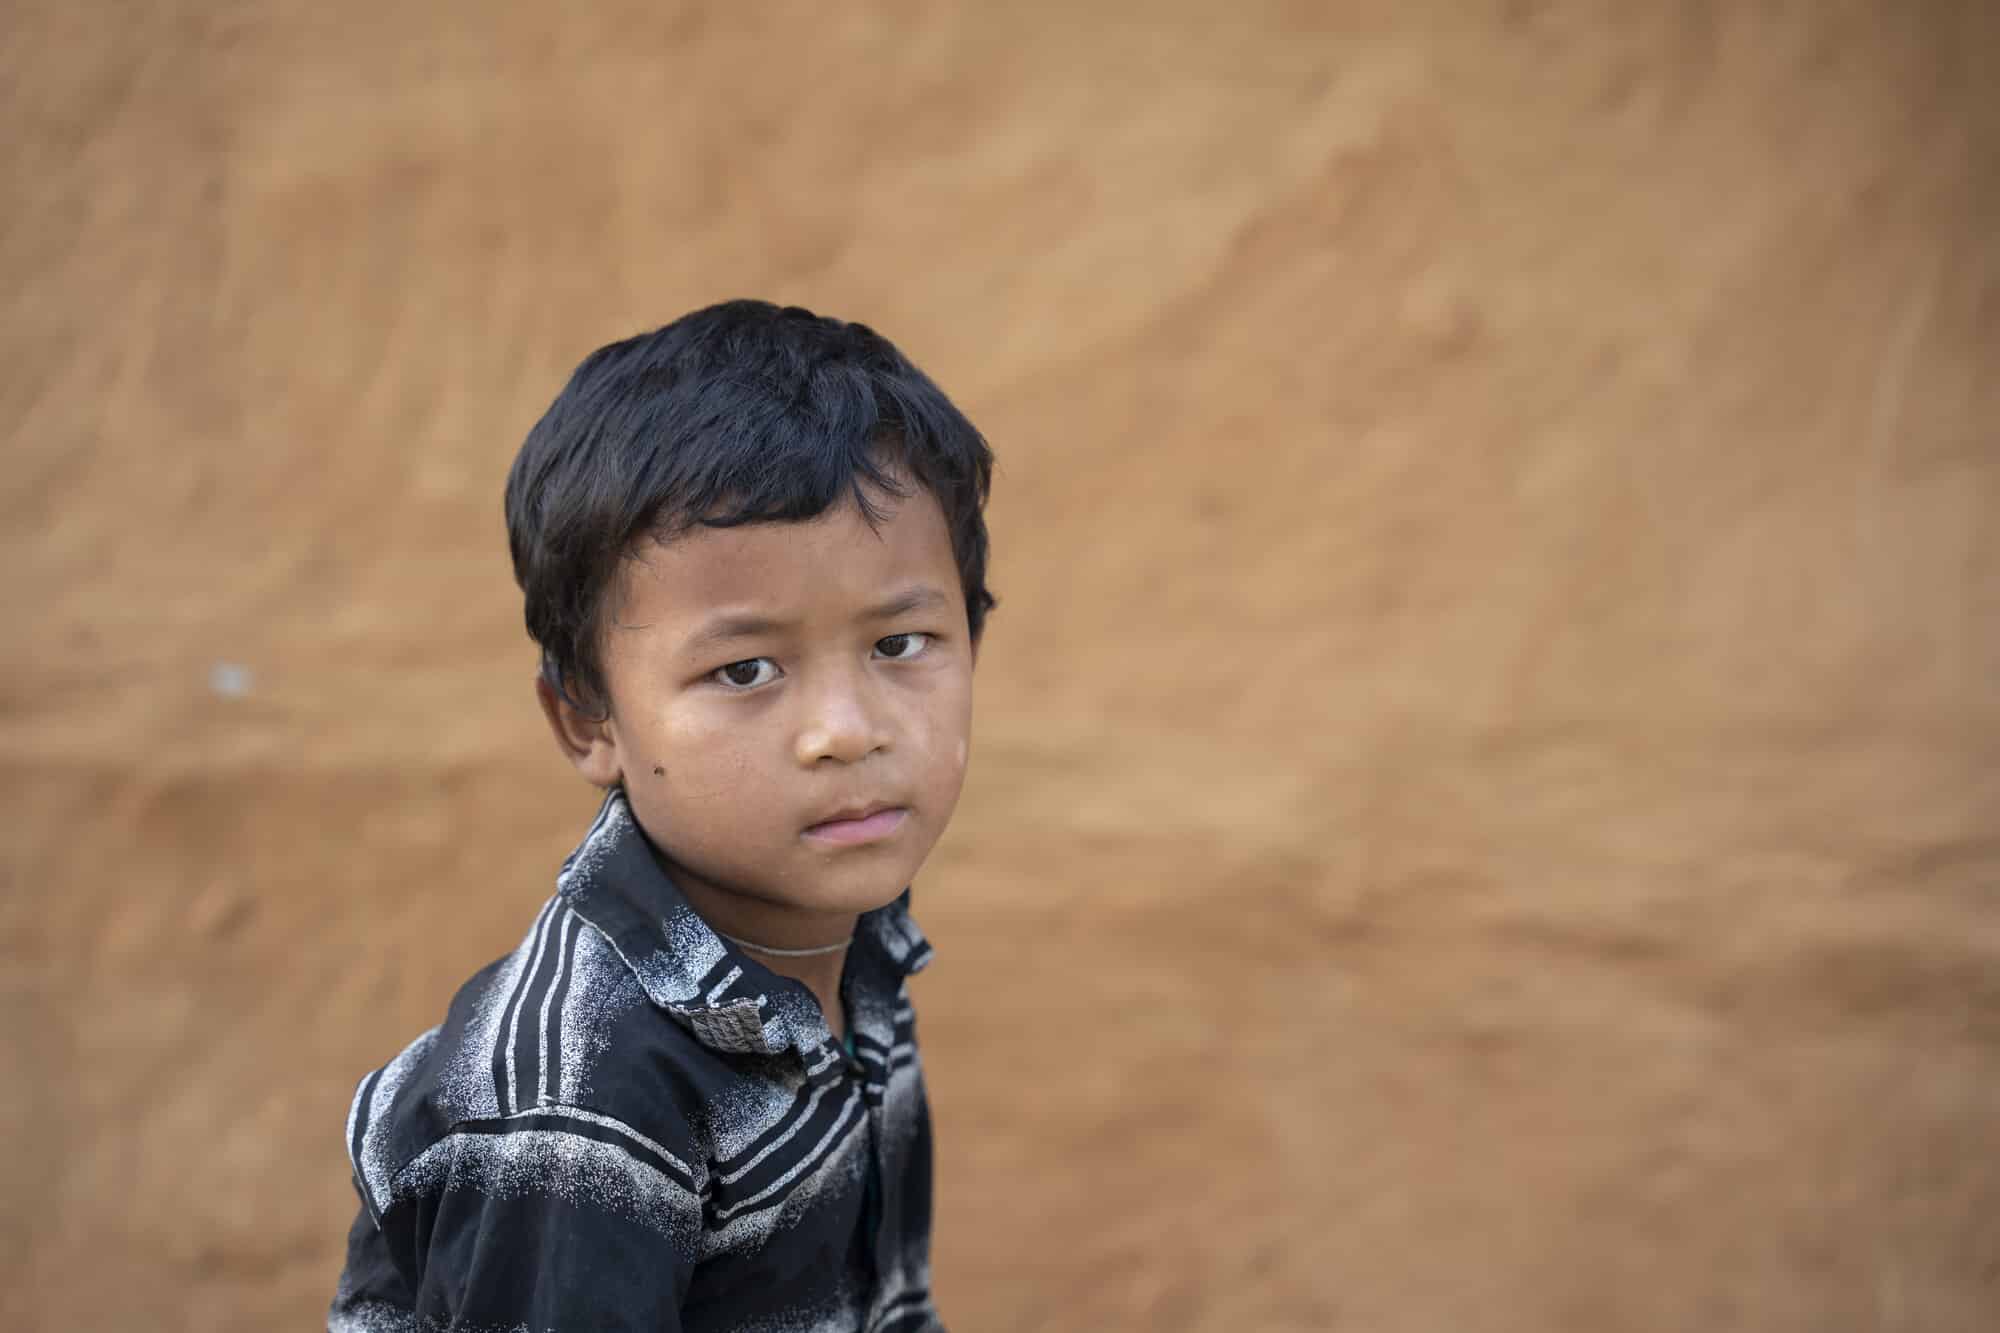 Young Nepali boy with short dark hair, in a striped polo shirt looks sadly sideways towards the camera, in front of brown earthen wall